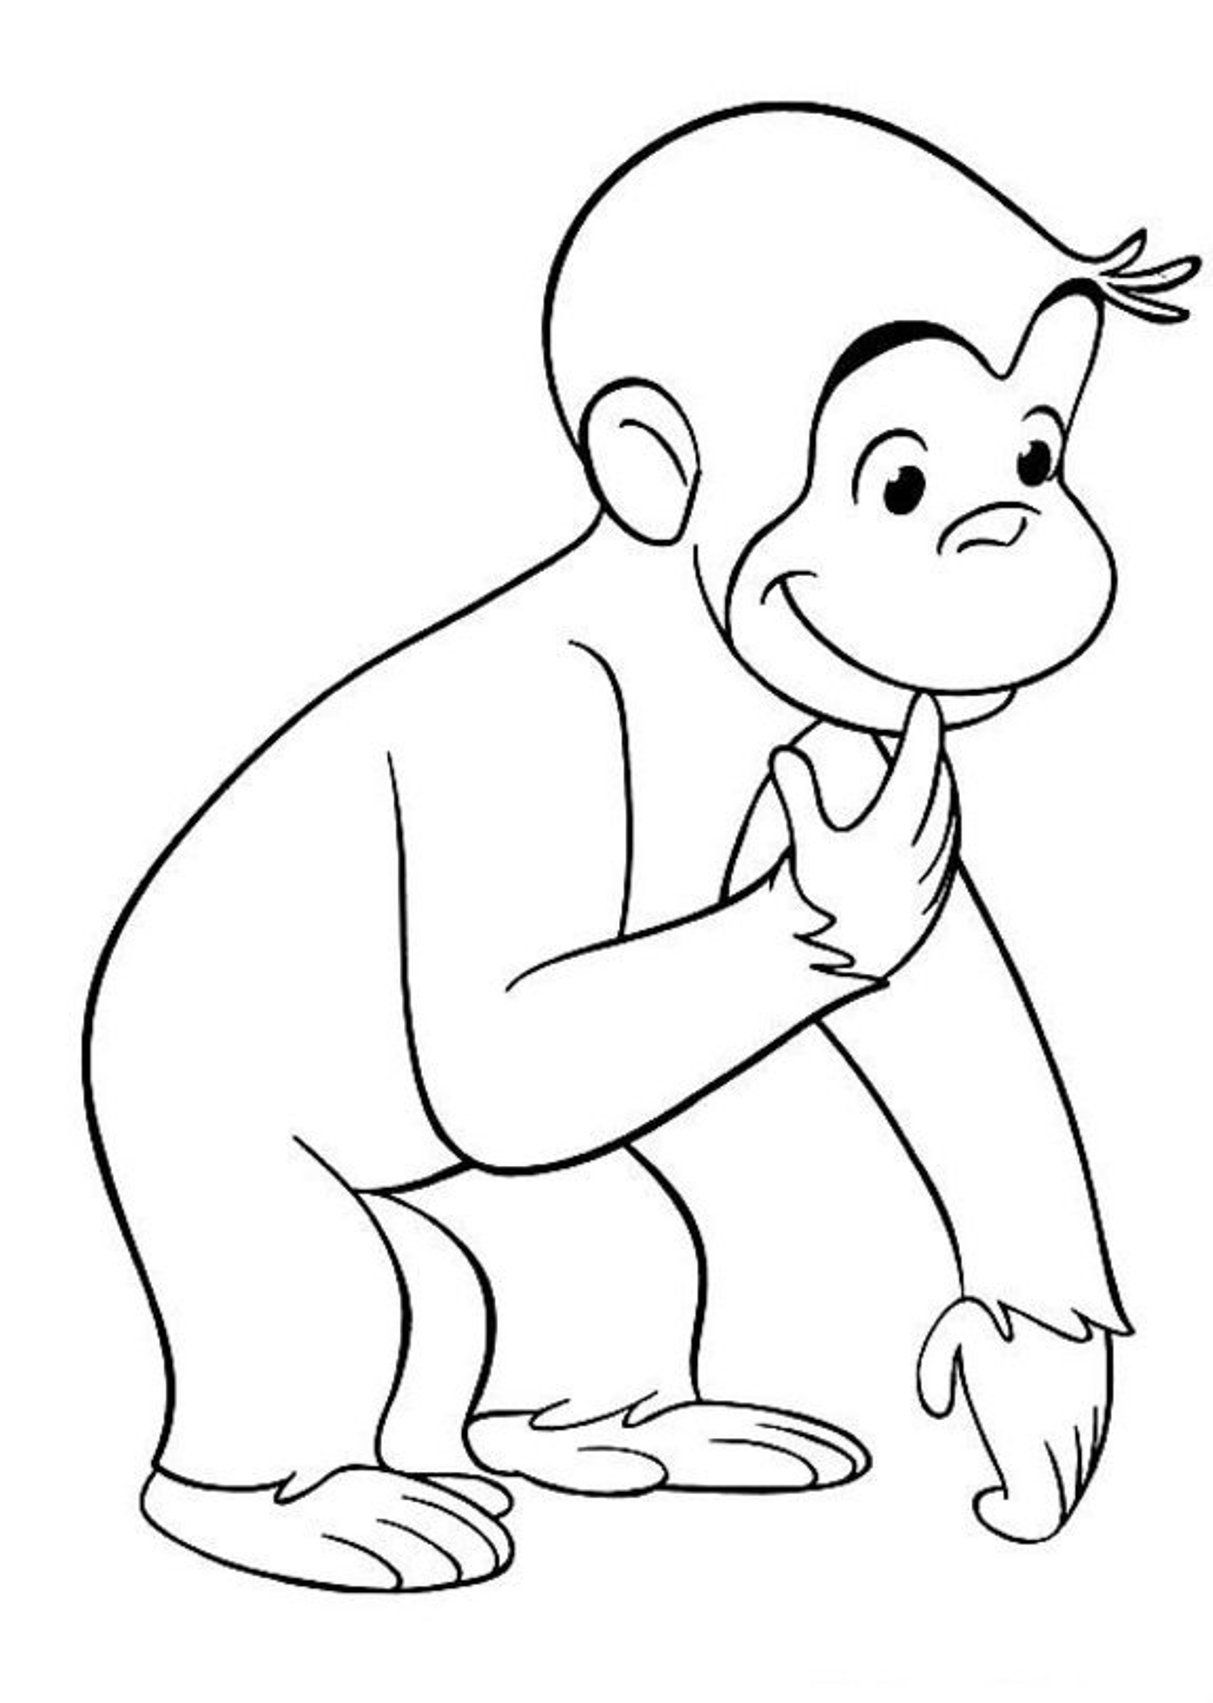 Hanging Curious George Coloring Pages | Cartoon Coloring pages of ...